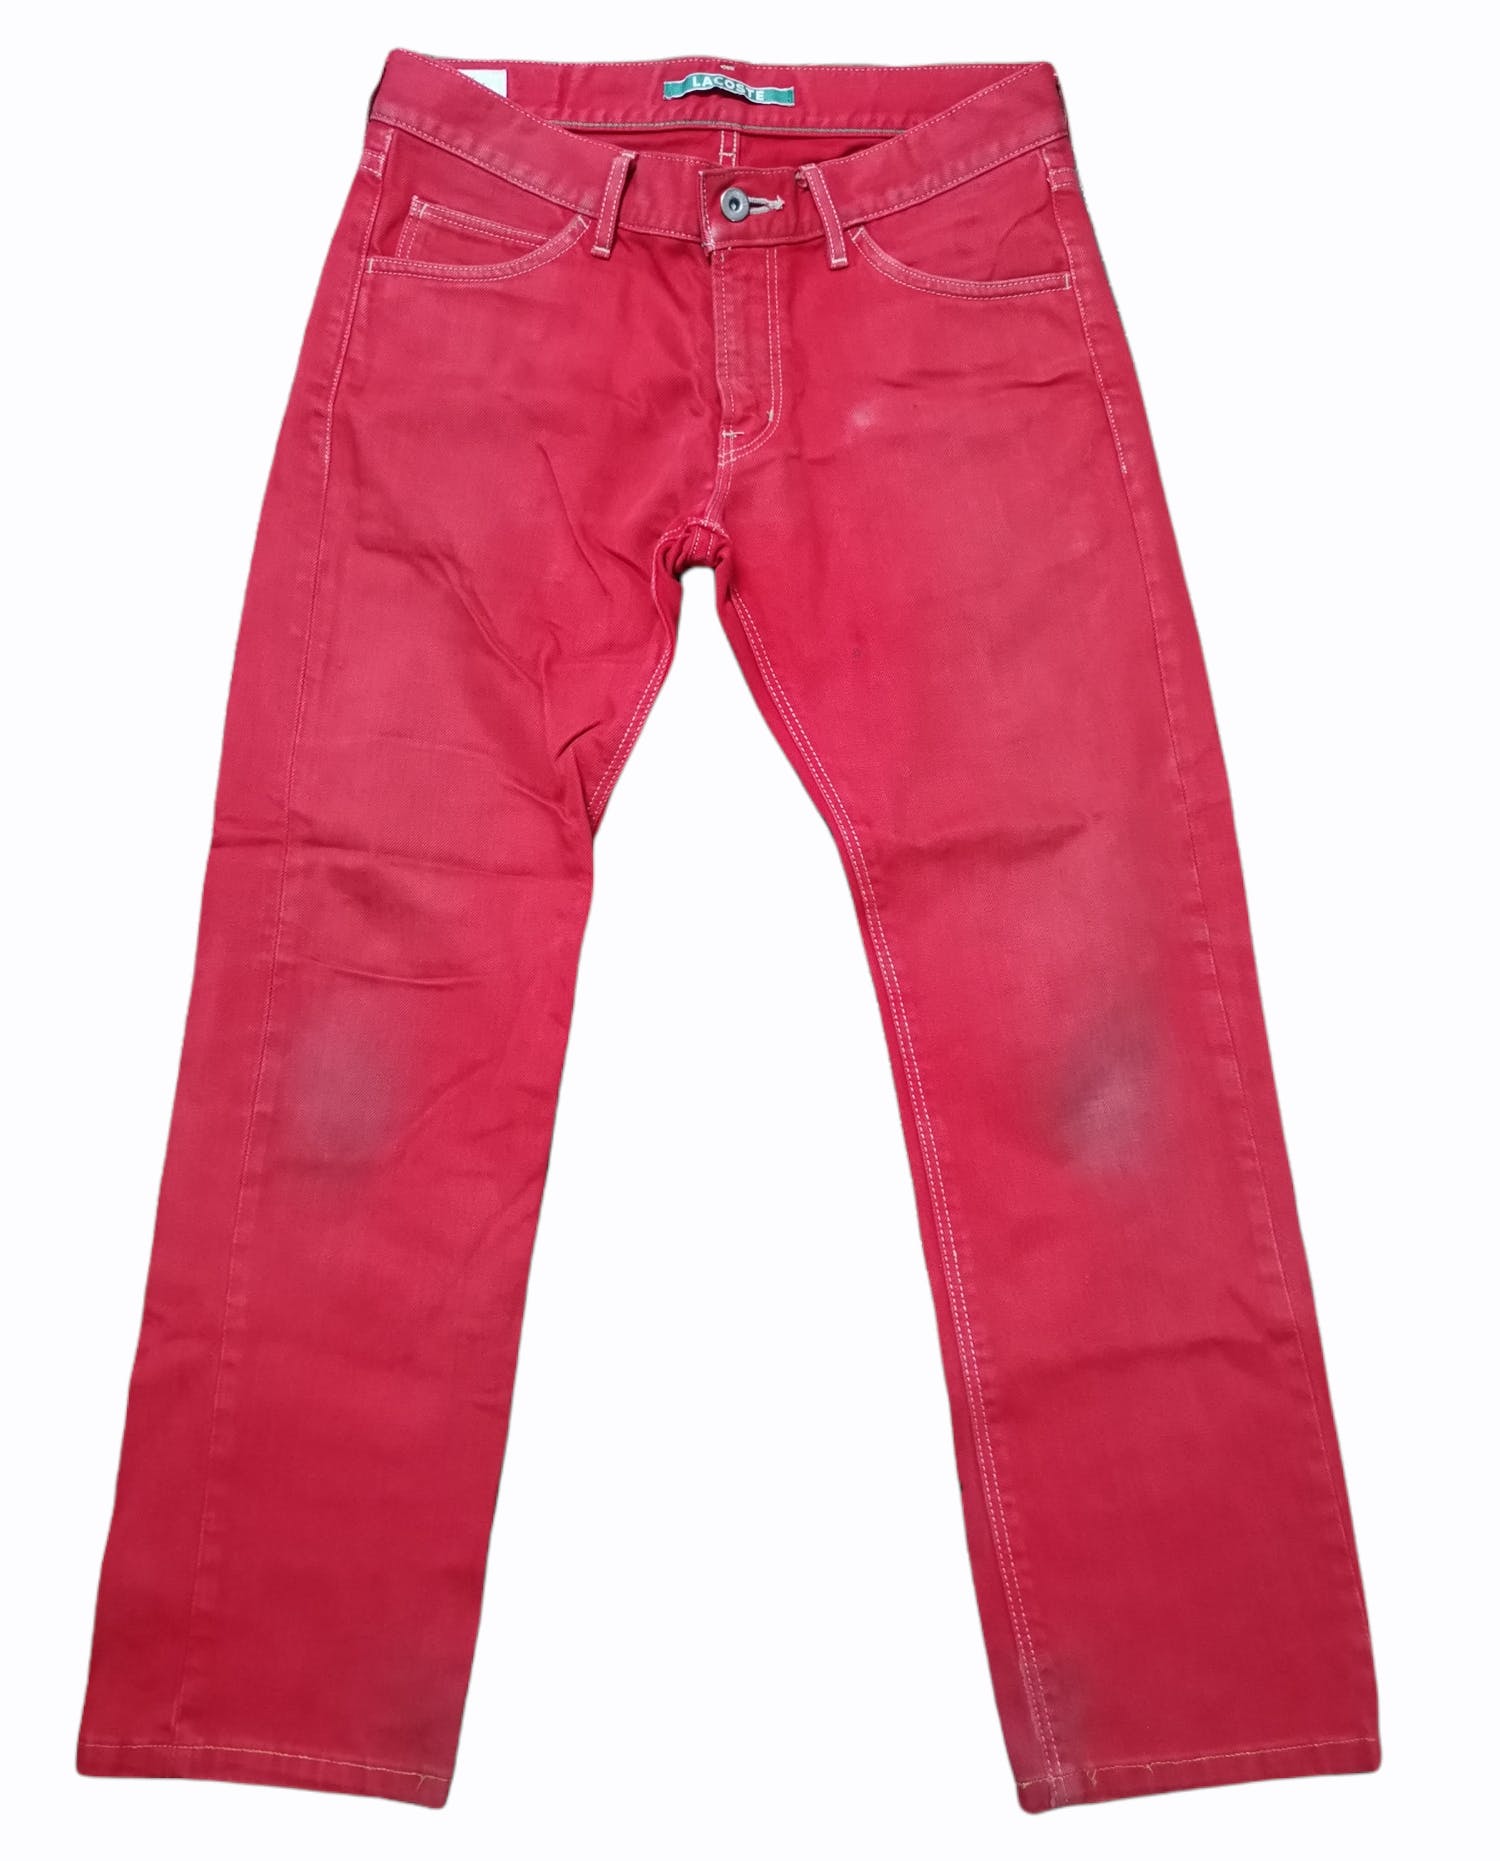 Lacoste Dirty Red Denim - 1